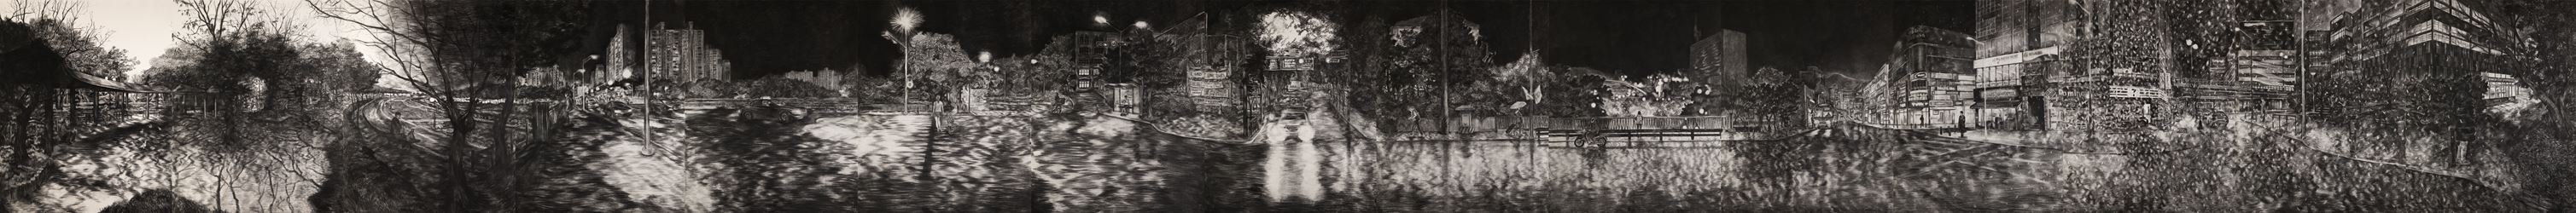 Jwa Haesun, The Most Ordinary Stories (2017–2018 panorama view). Charcoal on paper. 161 x 965 cm. Courtesy  Arario Gallery Samcheong, Seoul.